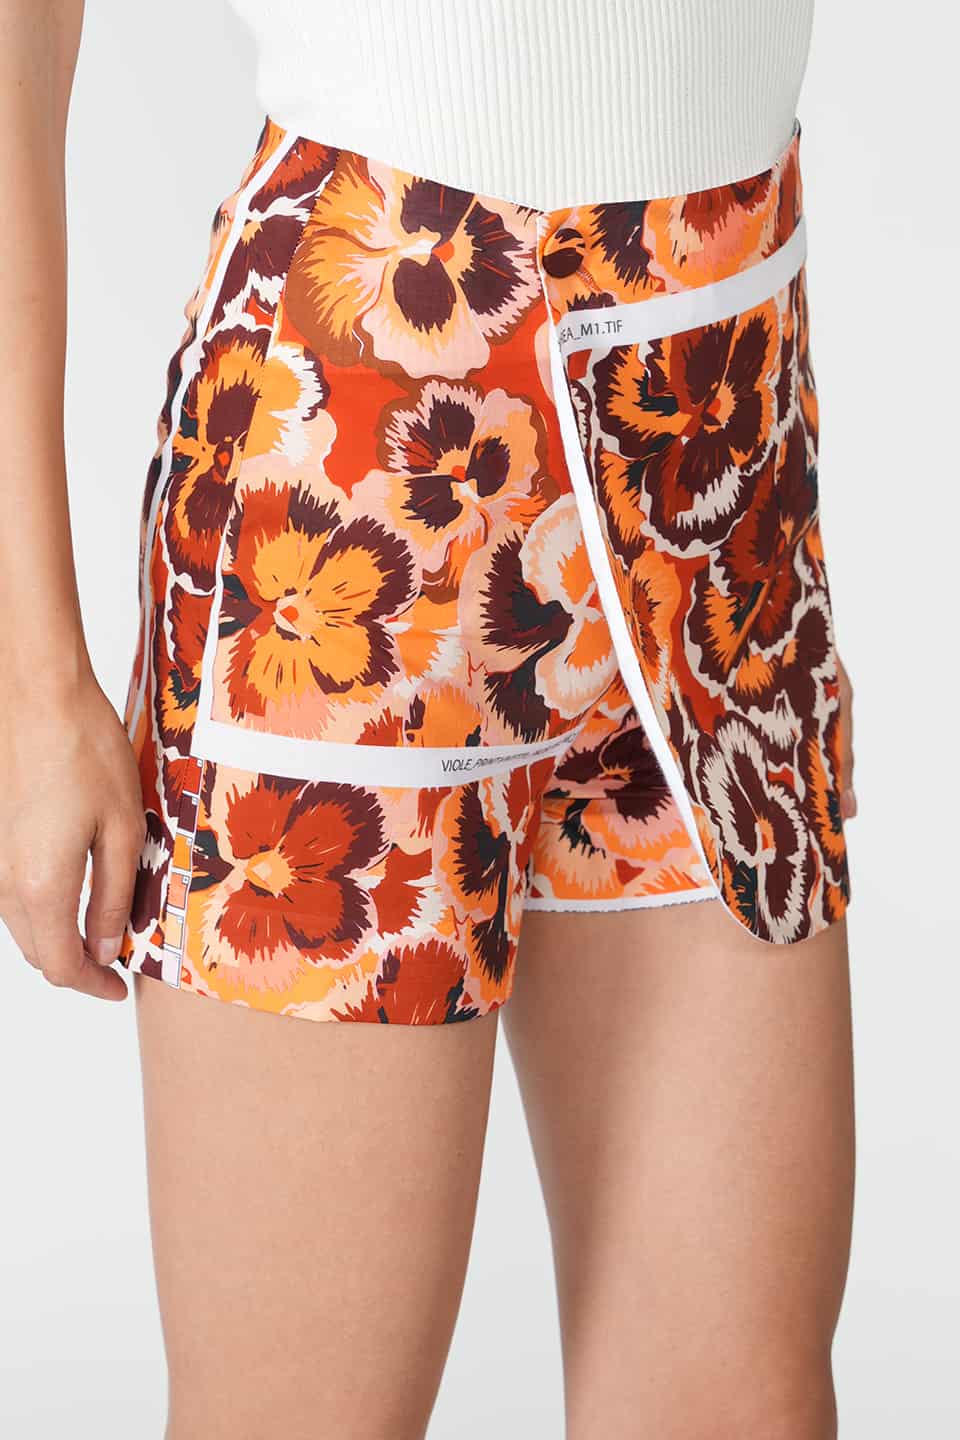 Thumbnail for Product gallery 4, Linen Shorts Orange/Brown